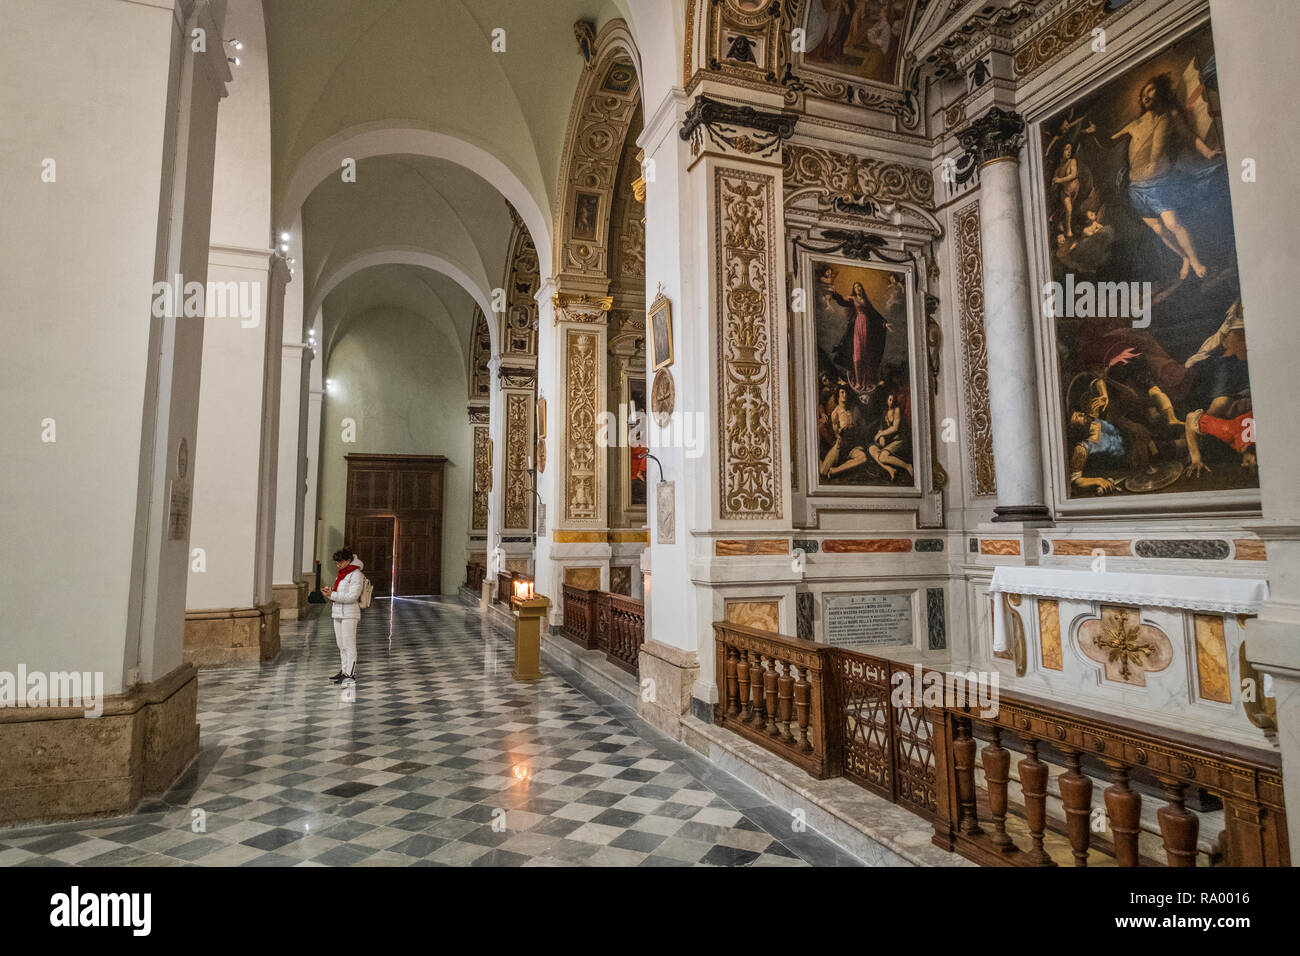 Interior of the Cathedral in the oldest part of the town of Colle Val d'Elsa, Siena, Tuscany Stock Photo